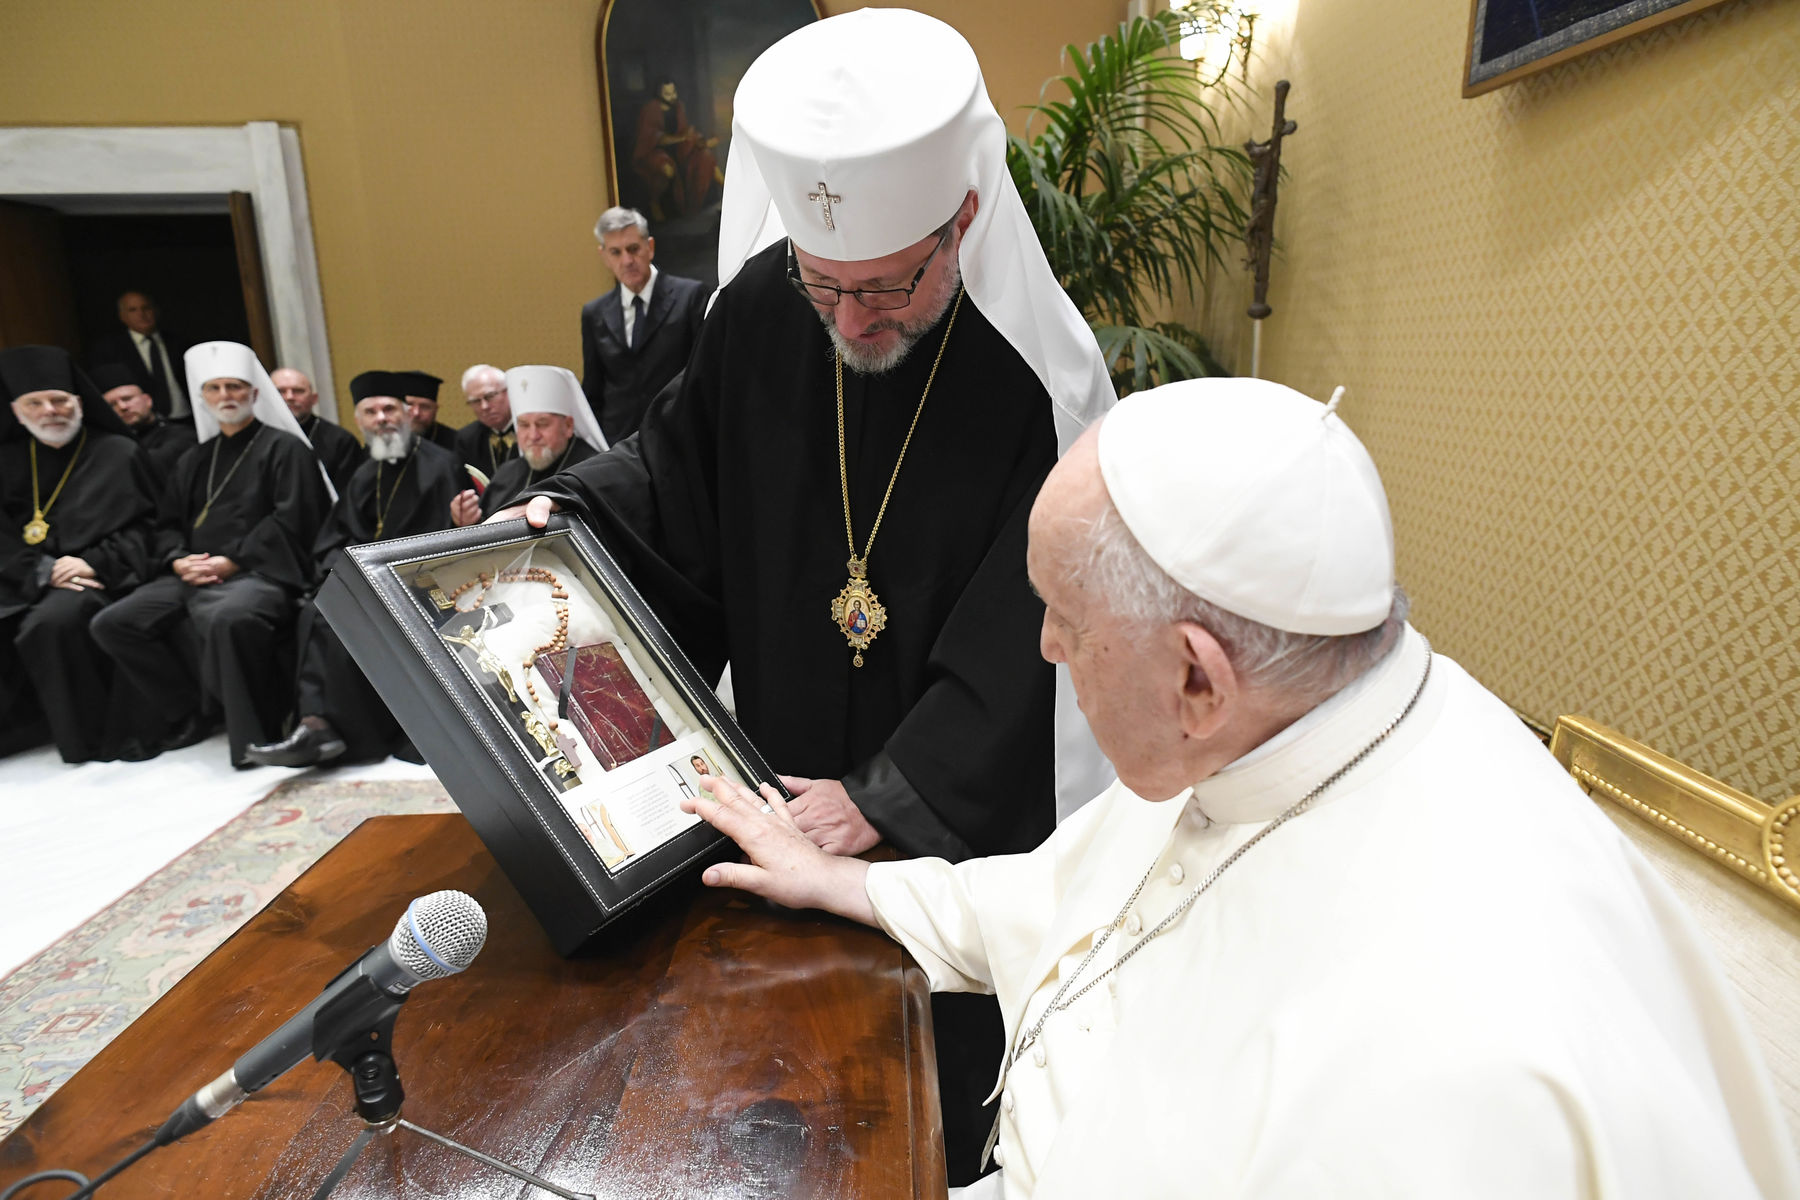 Ukrainian Bishops’ Gift to the Pope: What Did They Present?